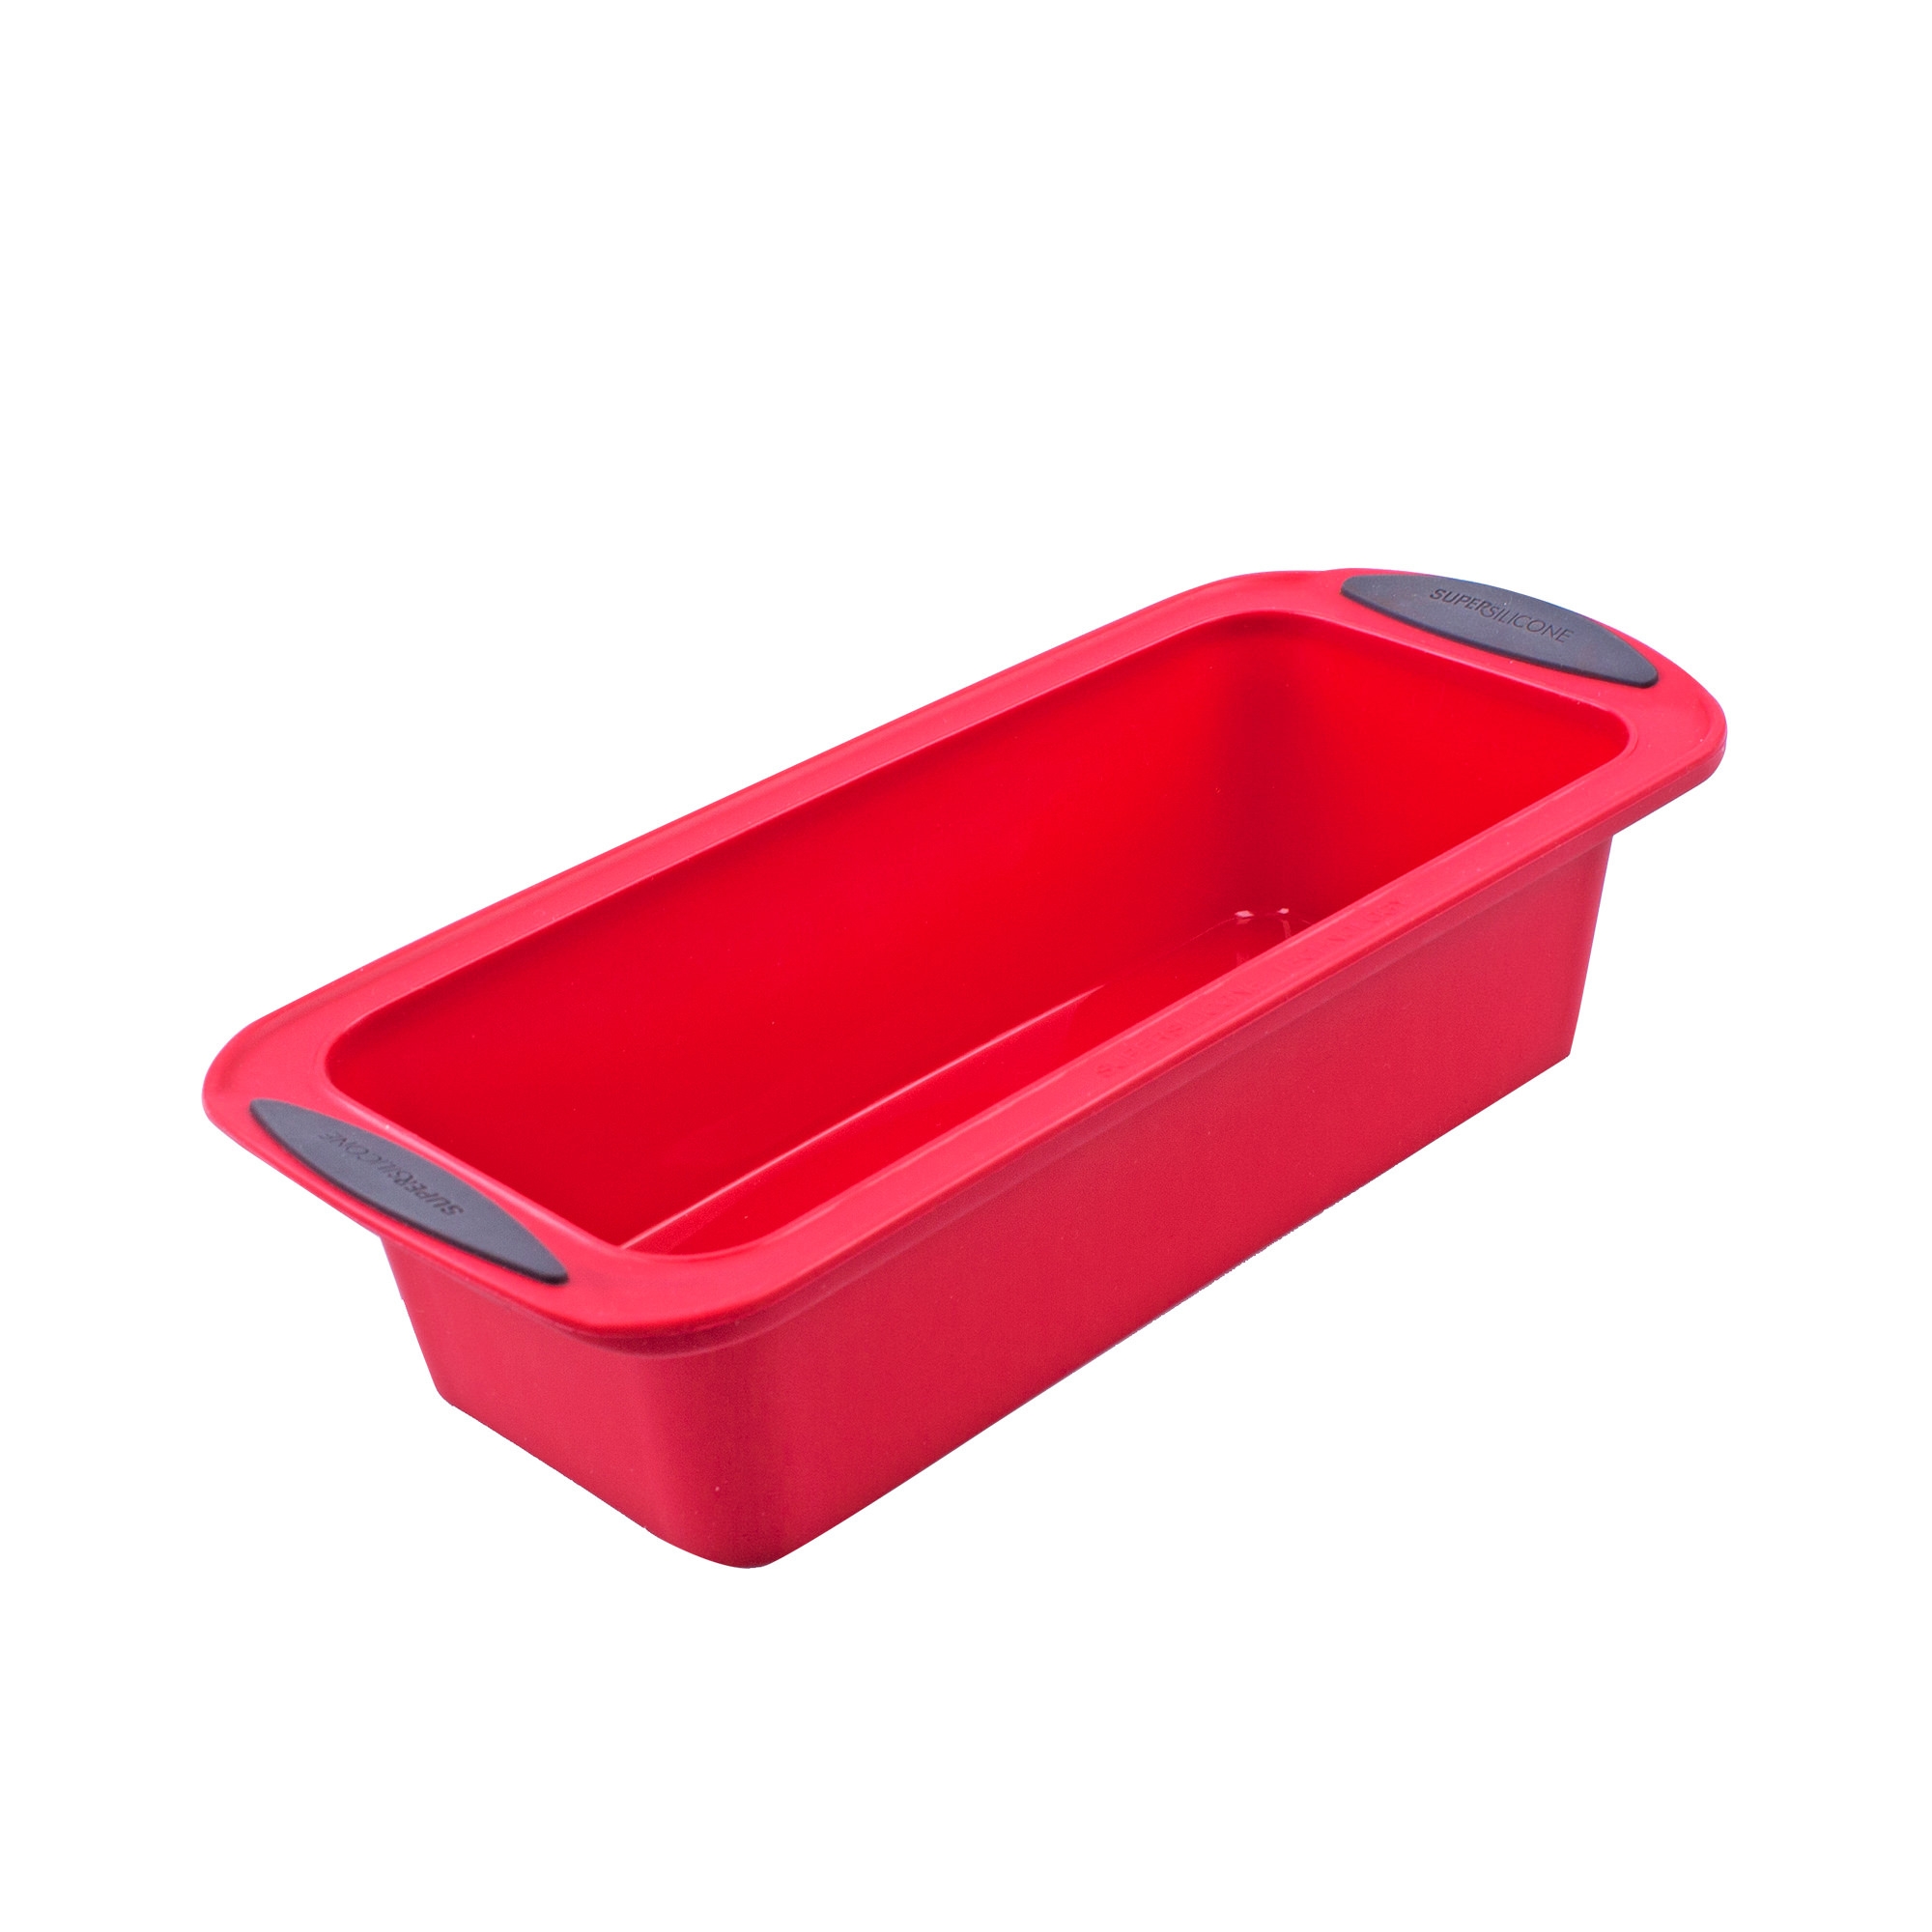 Daily Bake Silicone Loaf Pan 24x10cm Red Image 1